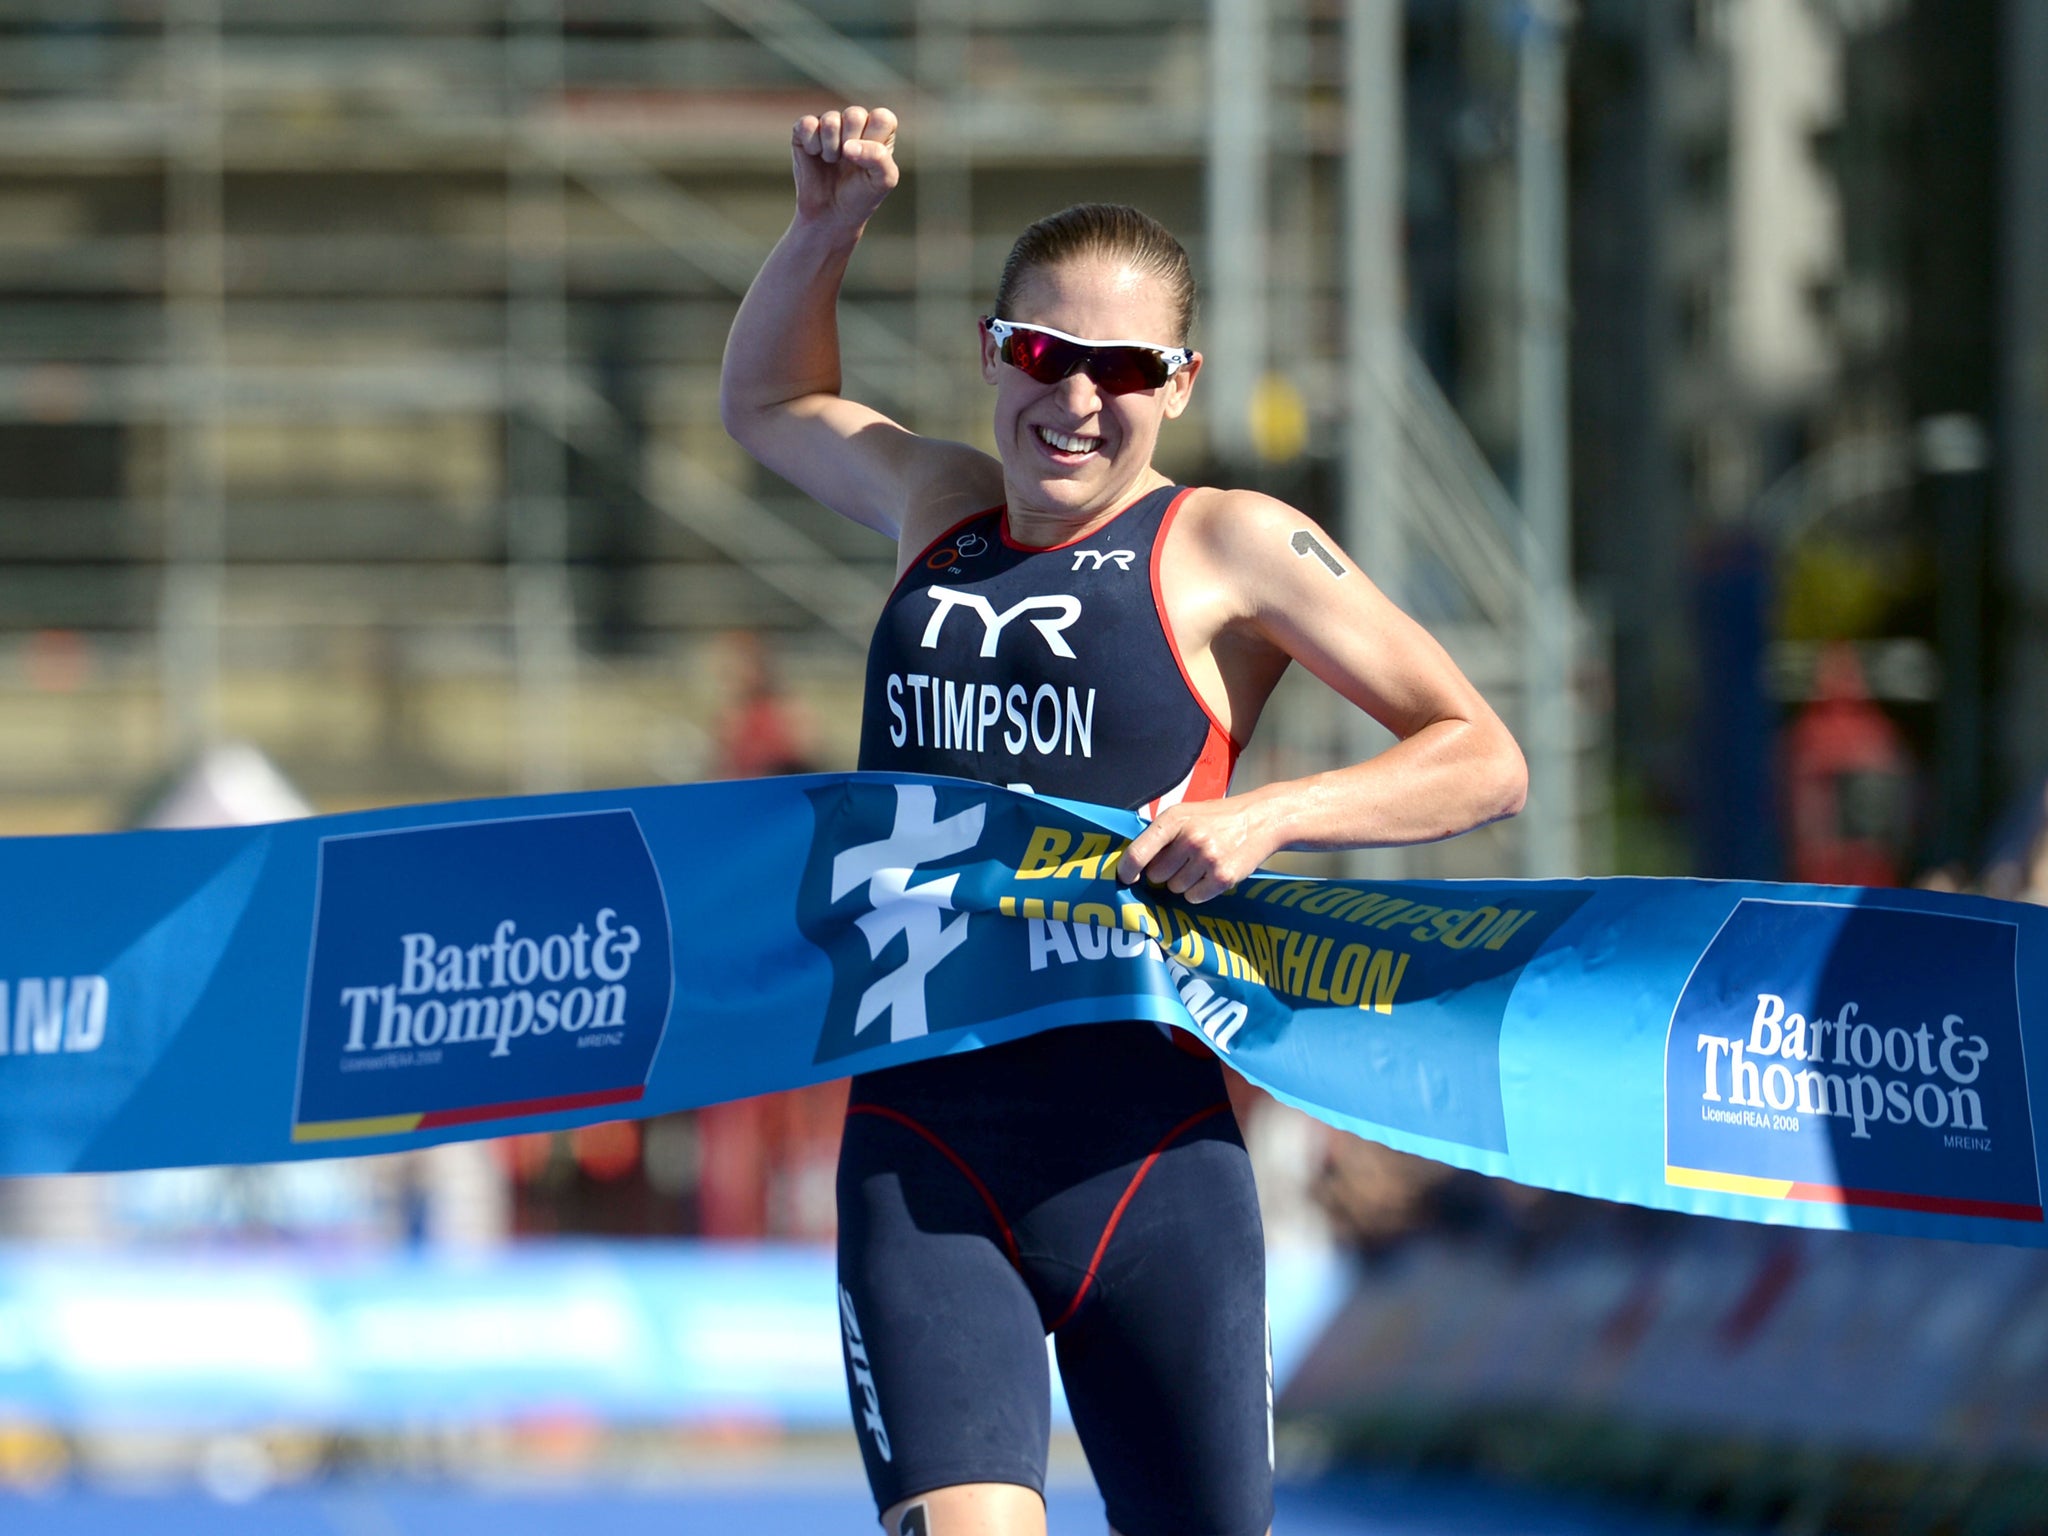 Jodie Stimpson takes victory in the opening round of the World Triathlon Series in Auckland